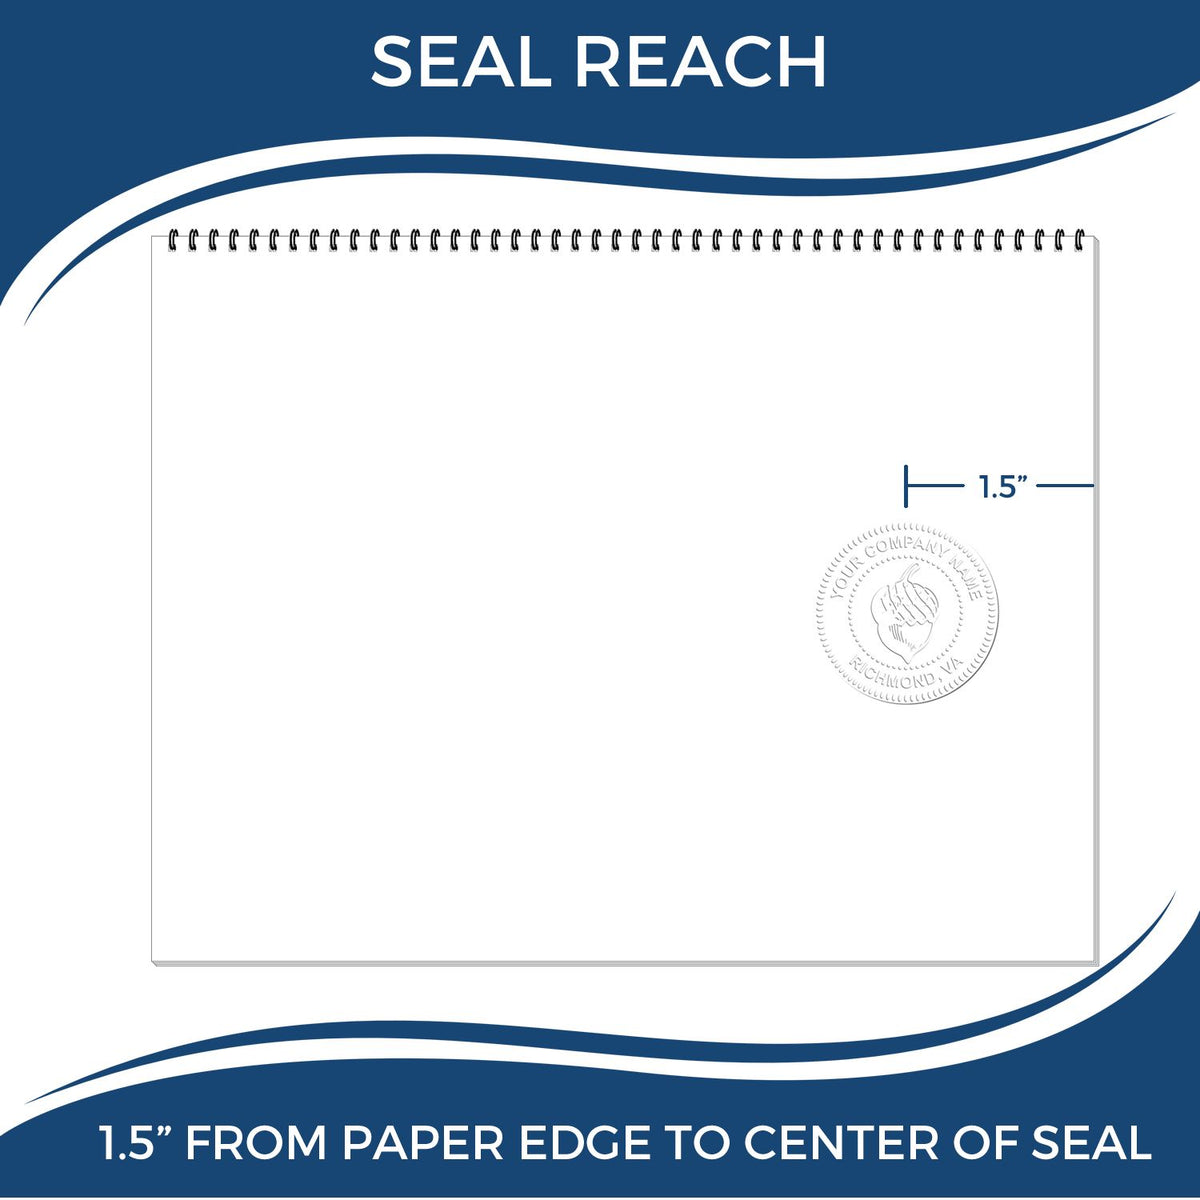 An infographic showing the seal reach which is represented by a ruler and a miniature seal image of the State of North Dakota Soft Land Surveyor Embossing Seal